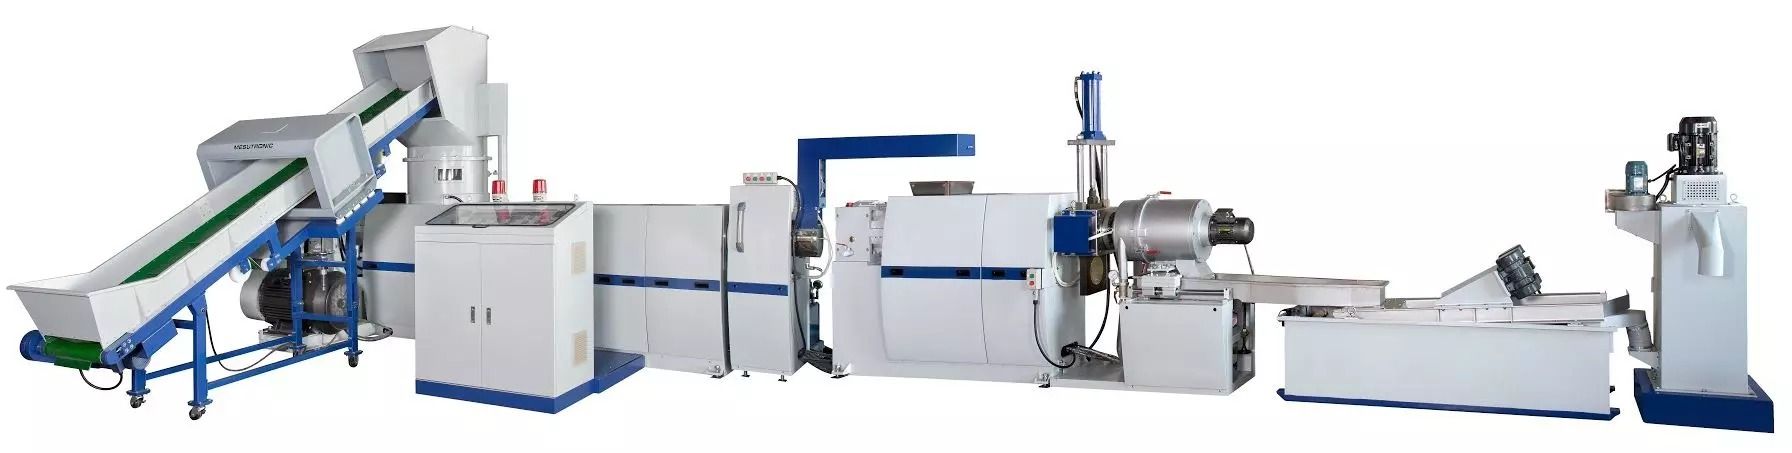 3-in-1 Shredder Intergrated Two-Stage Plastic Recycling Machine incorporates the crusher, the extruder and the pelletizer, suitable for recycling soft plastics